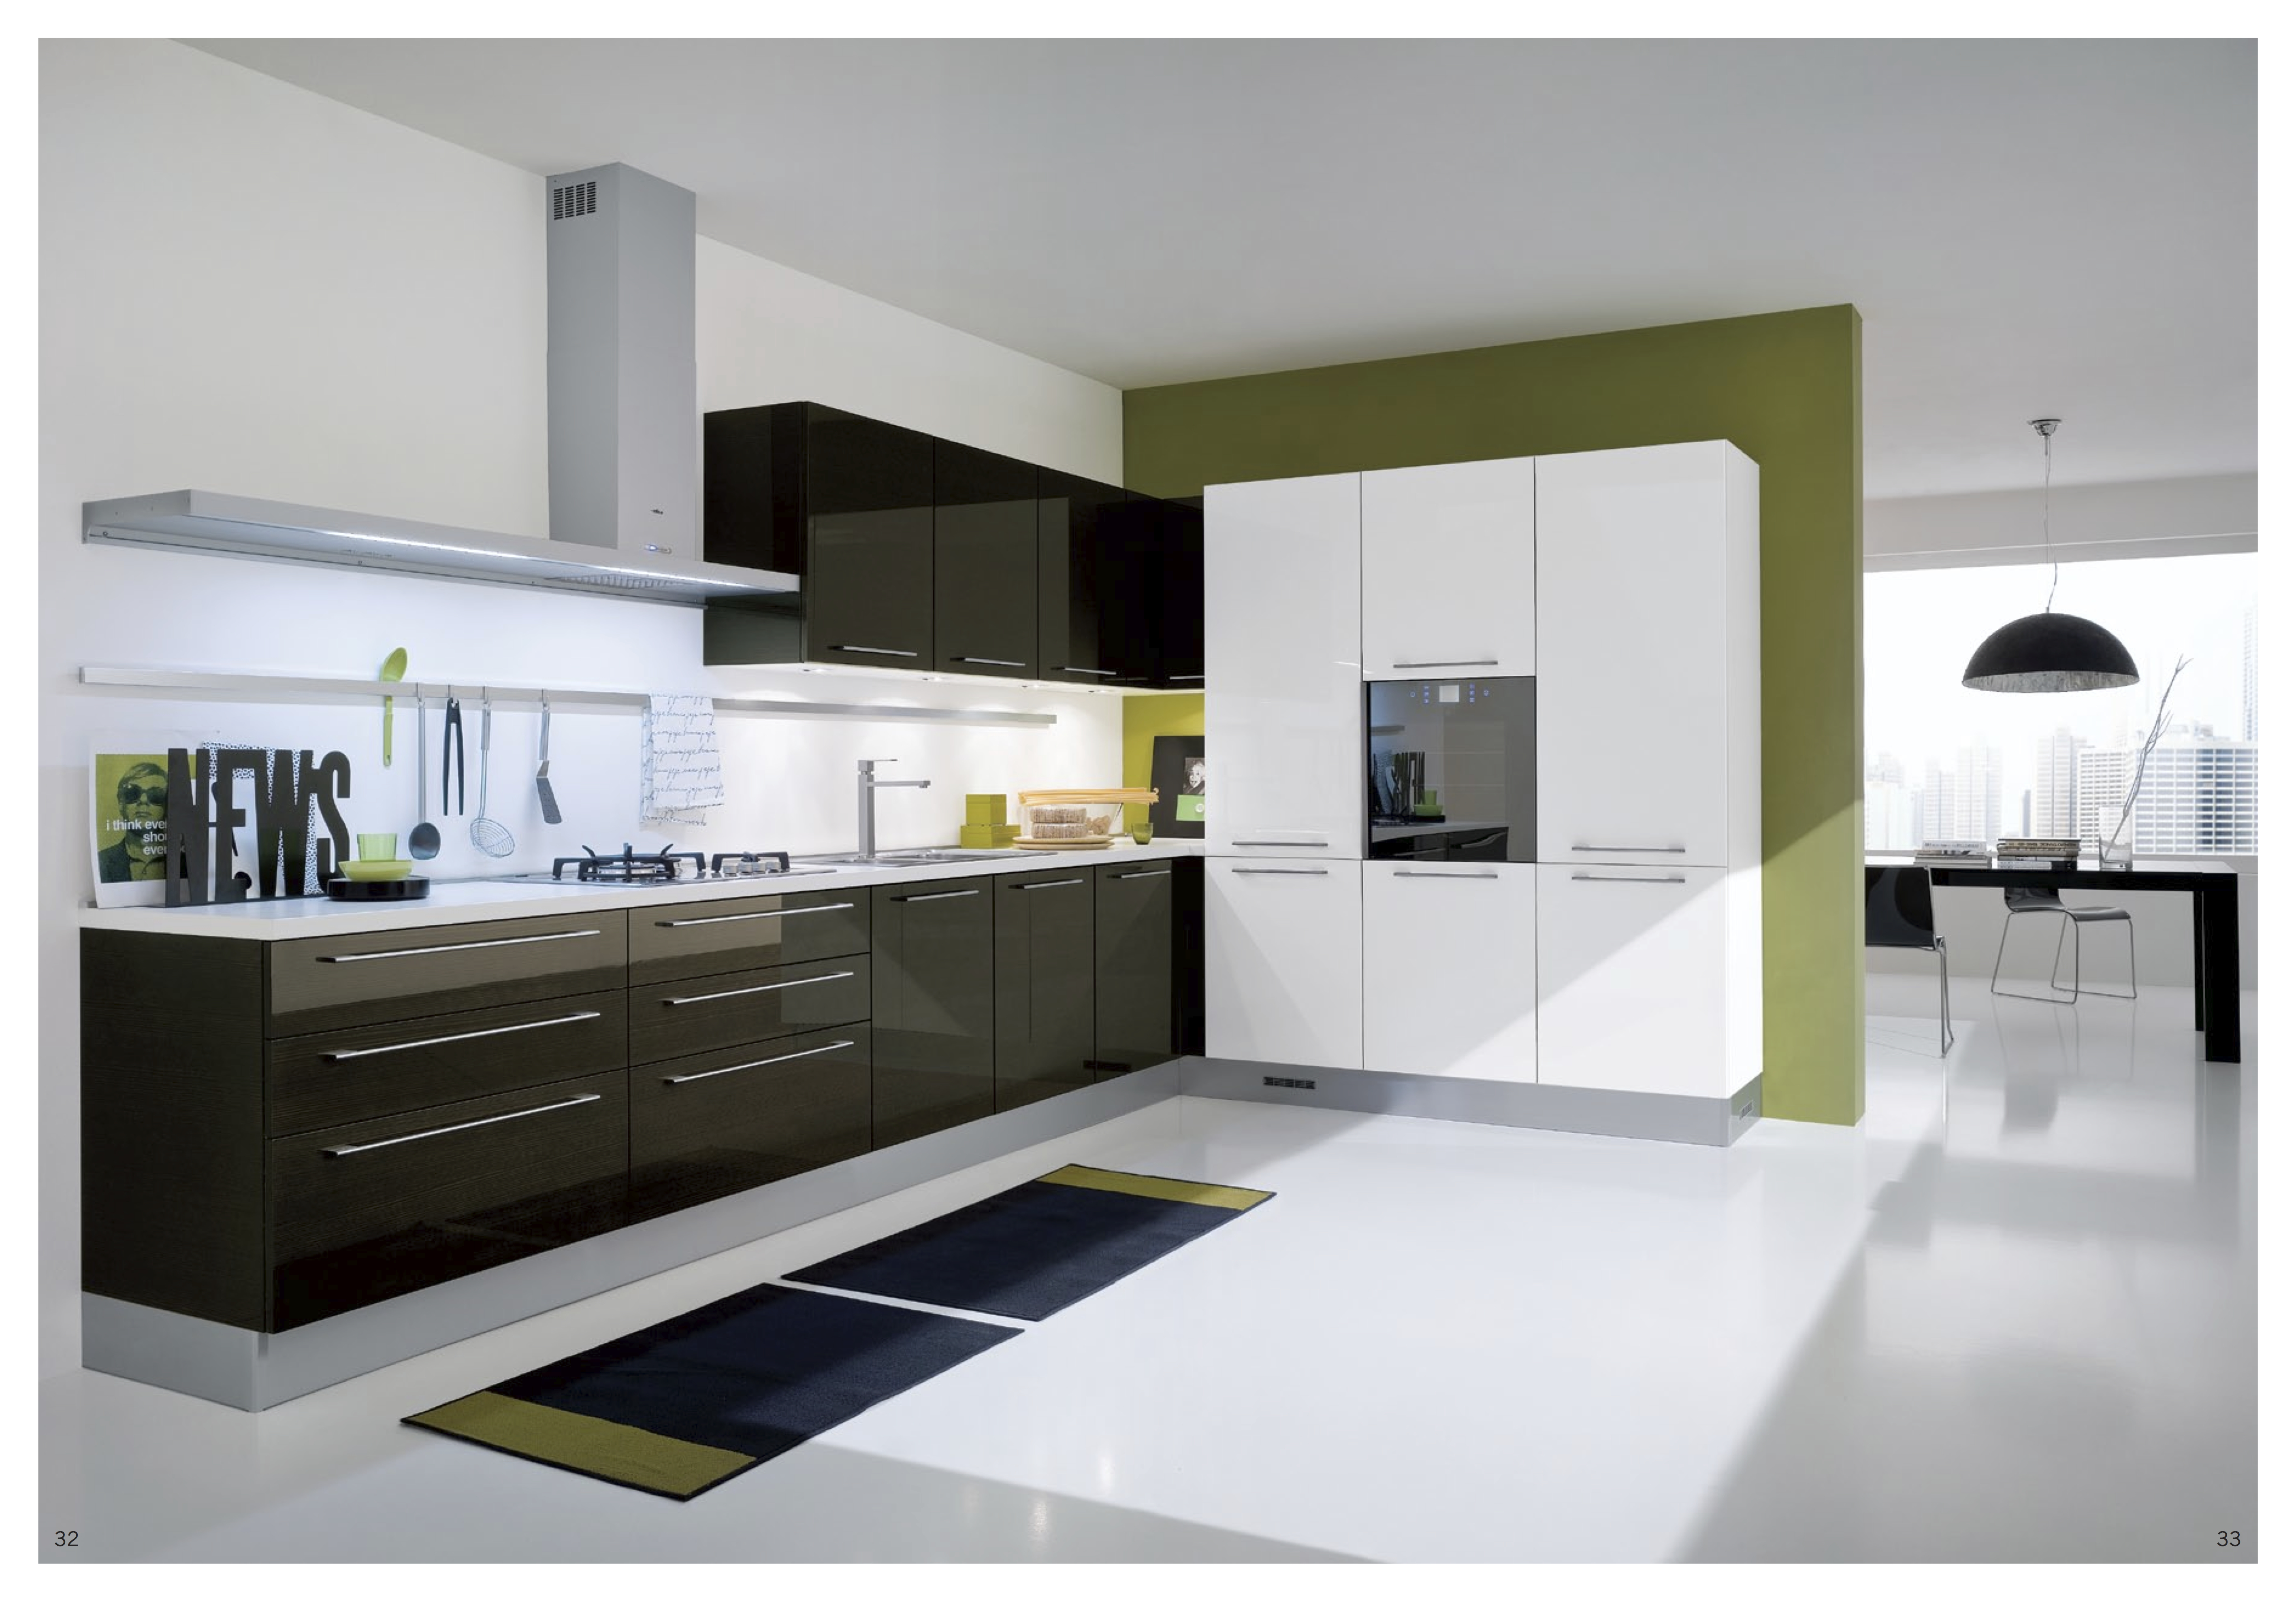 TAKE YOUR KITCHEN TO NEXT LEVEL WITH THESE 28 MODERN KITCHEN DESIGNS